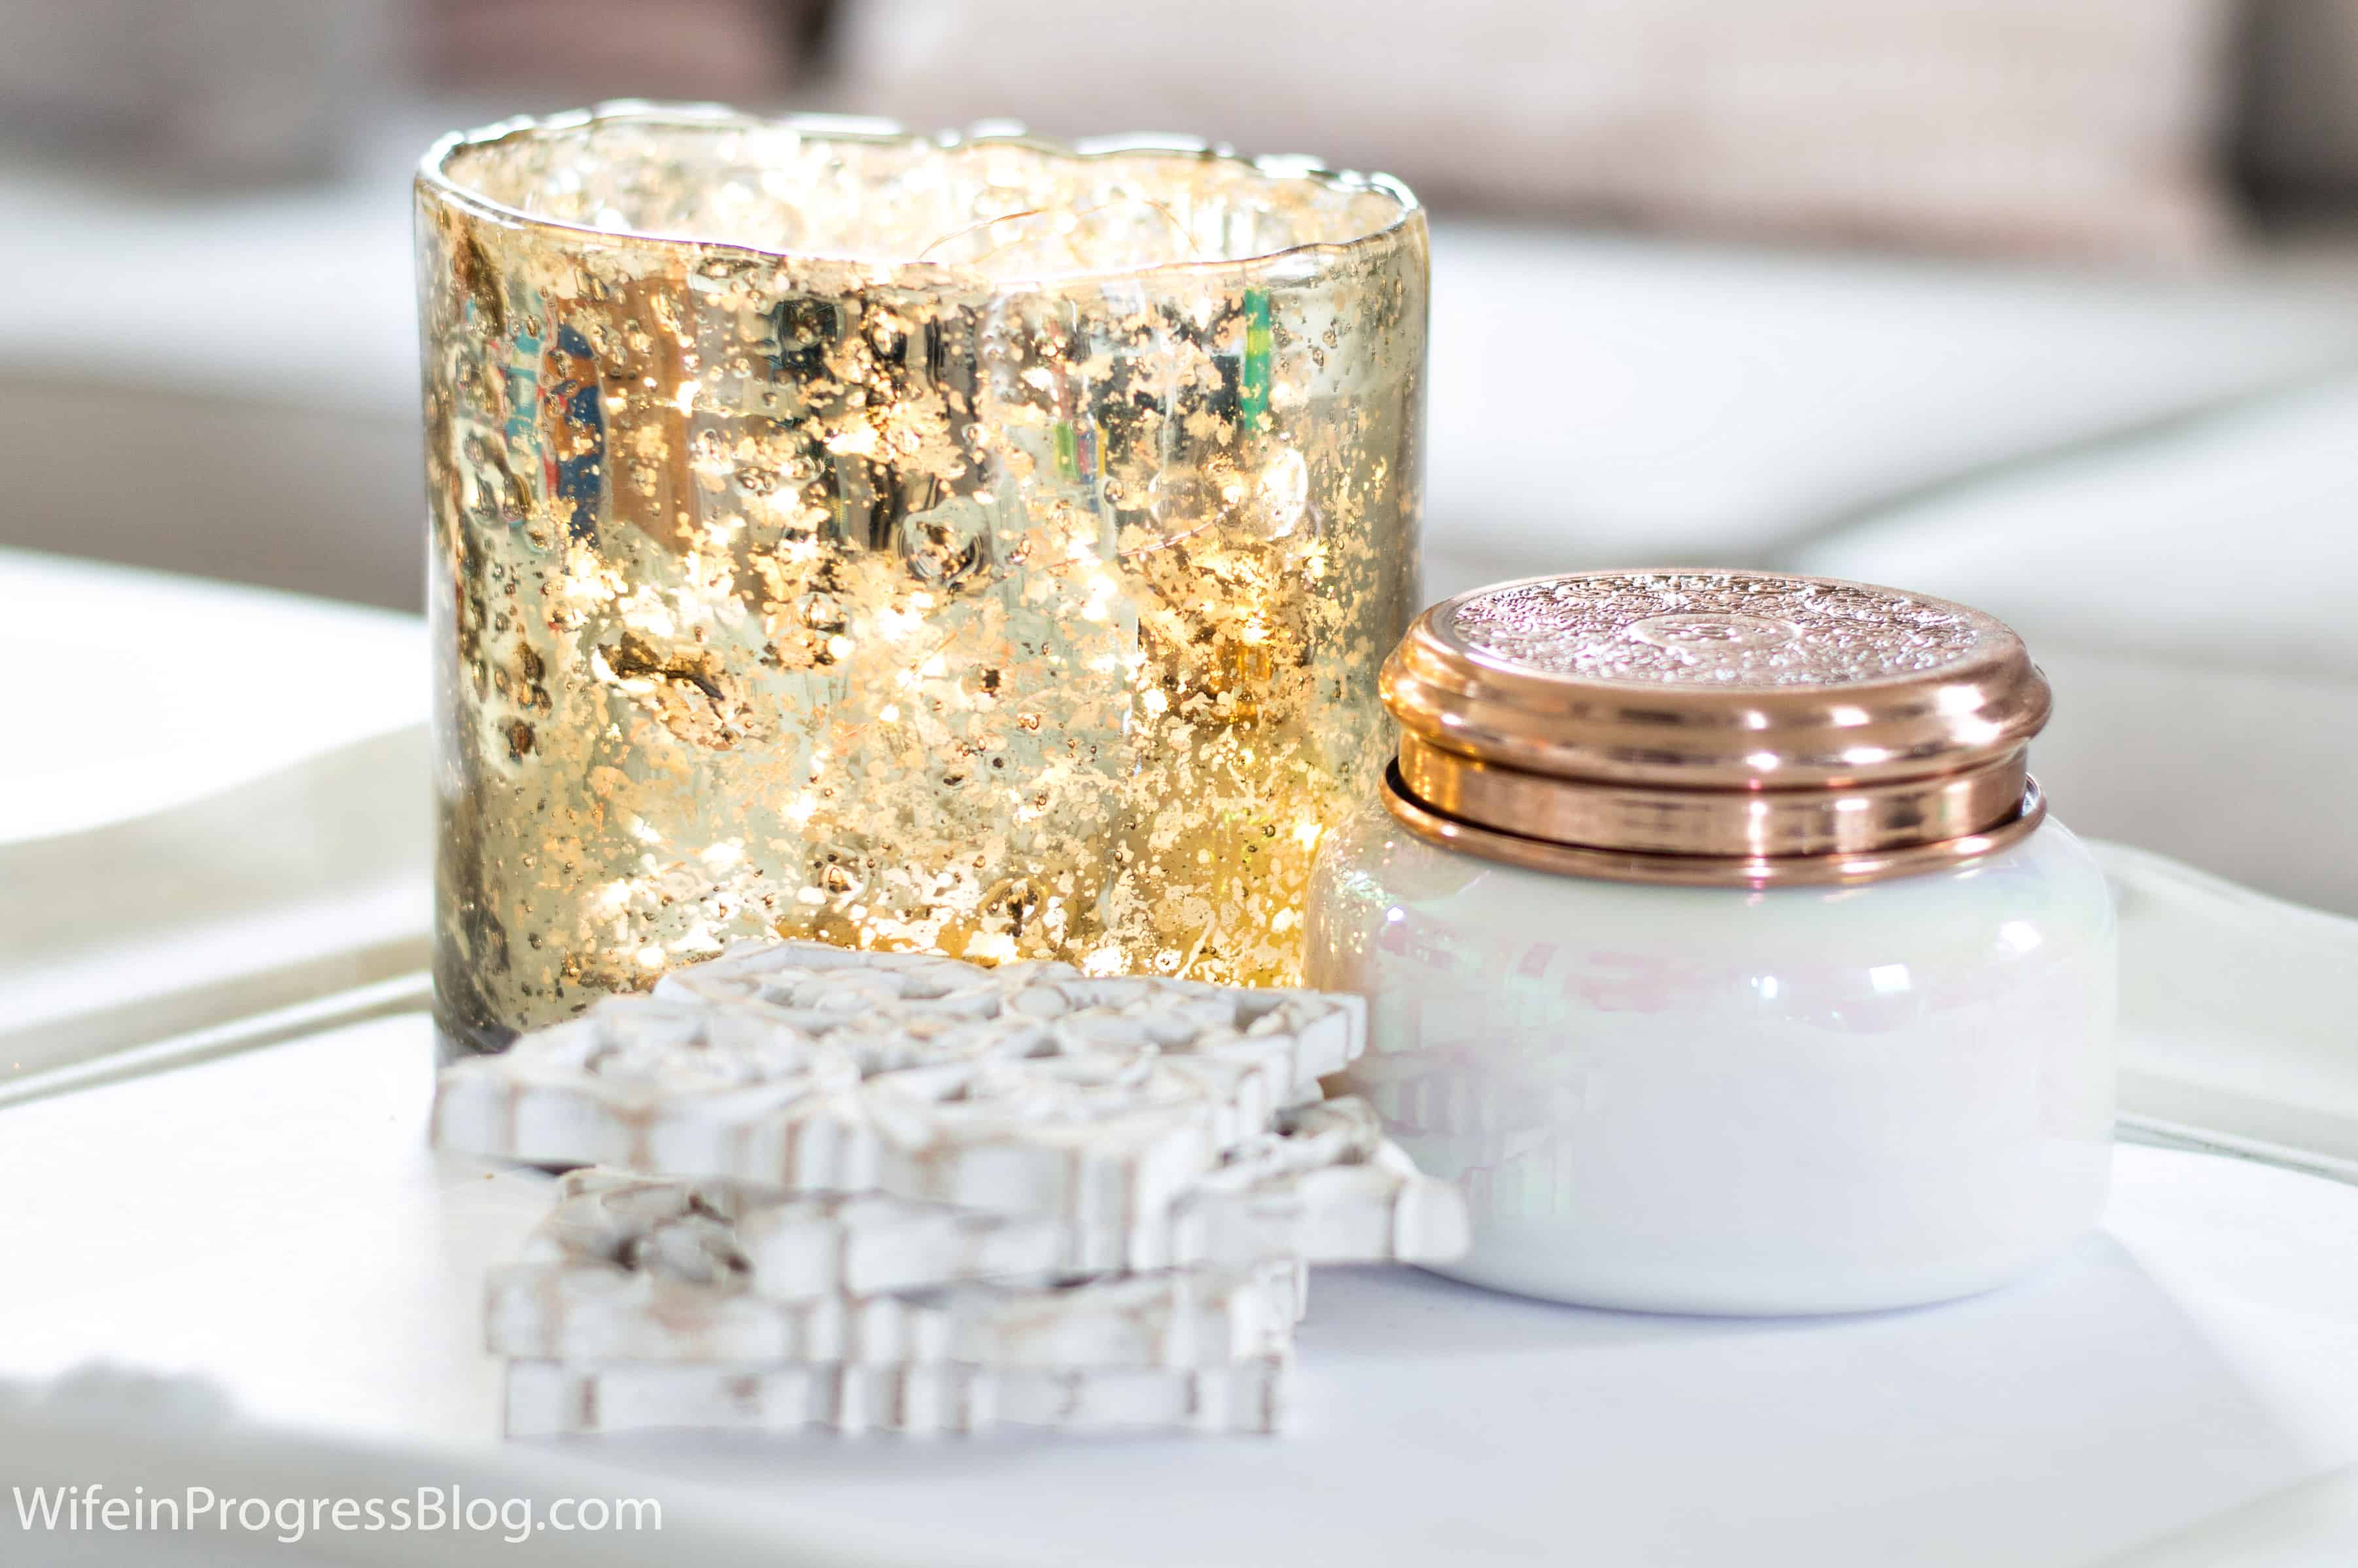 A gold leaf patterned candle holder, a white jar with copper cover, and a set of square white coasters with intricate pattern